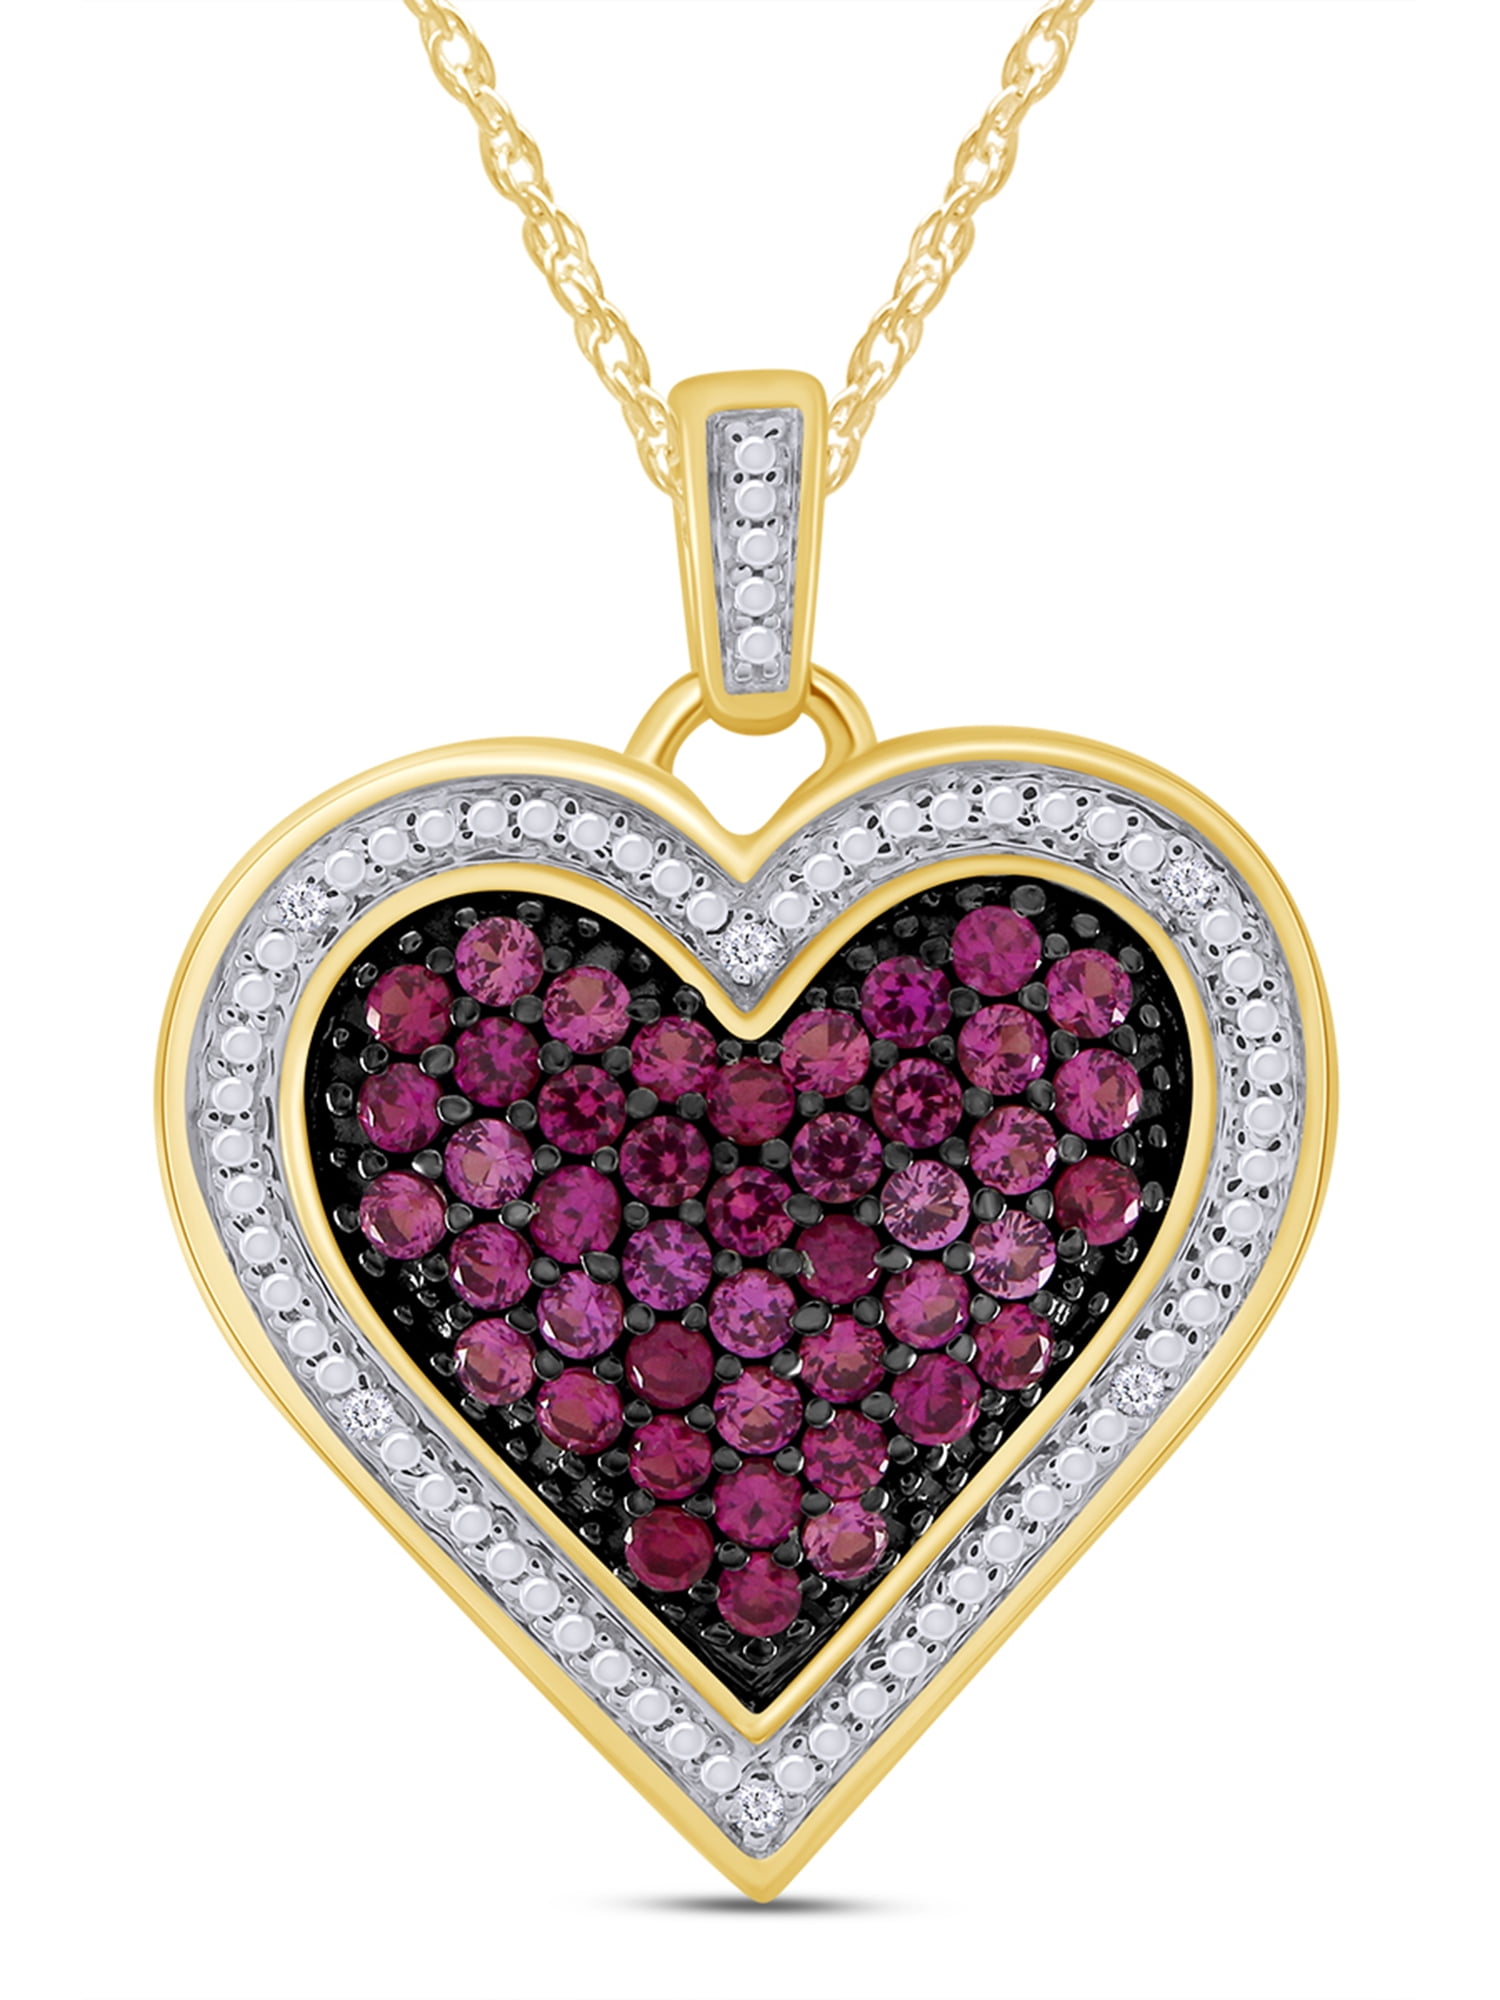 12 Red Ruby Gemstones Diamond Heart Pendant Necklace Yellow 14k Gold over 925 SS